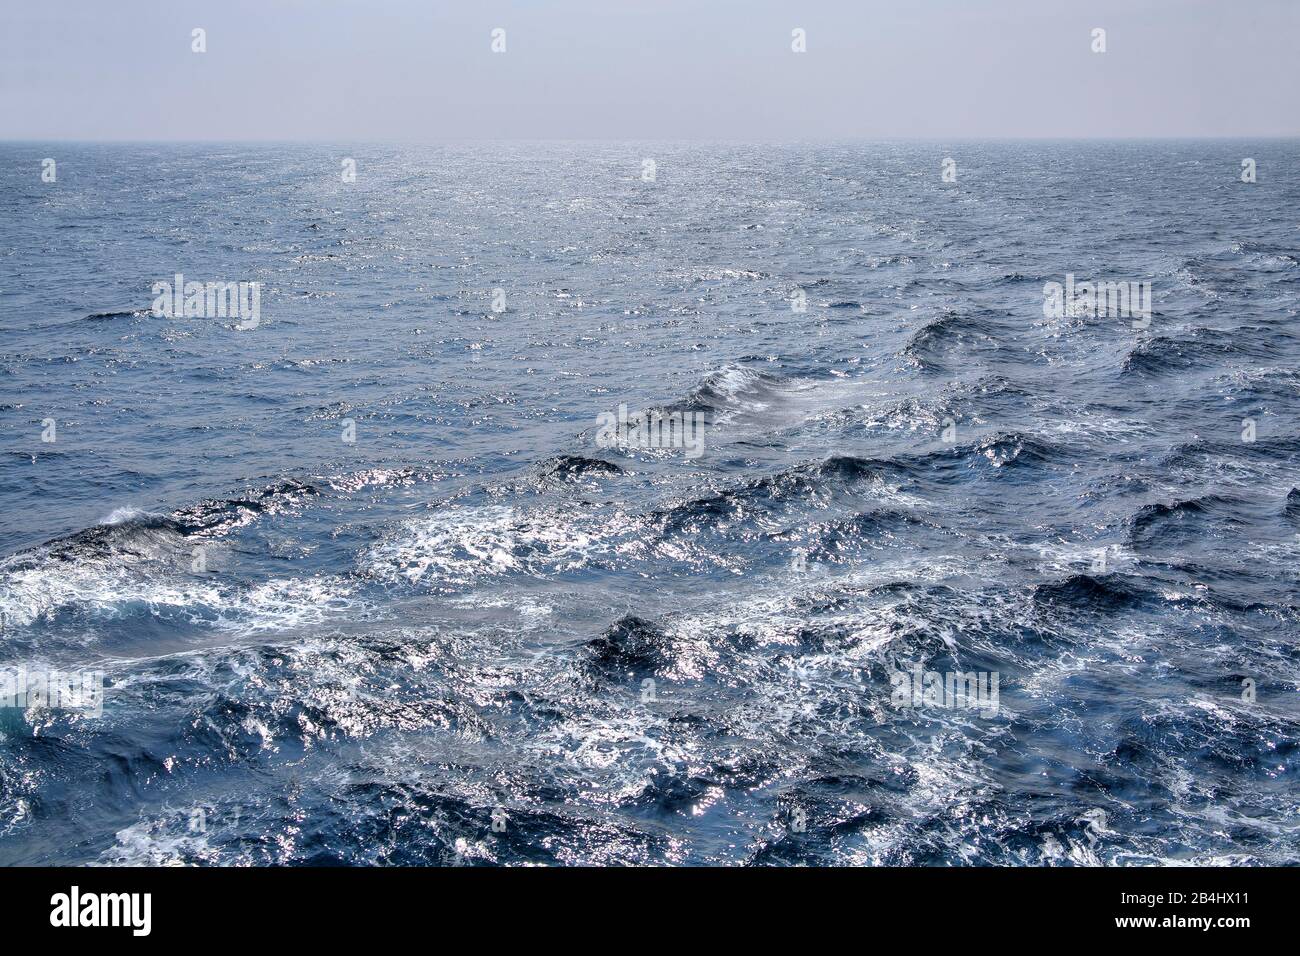 Atlantic Ocean with waves and whitecaps in the Bay of Biscay Stock Photo